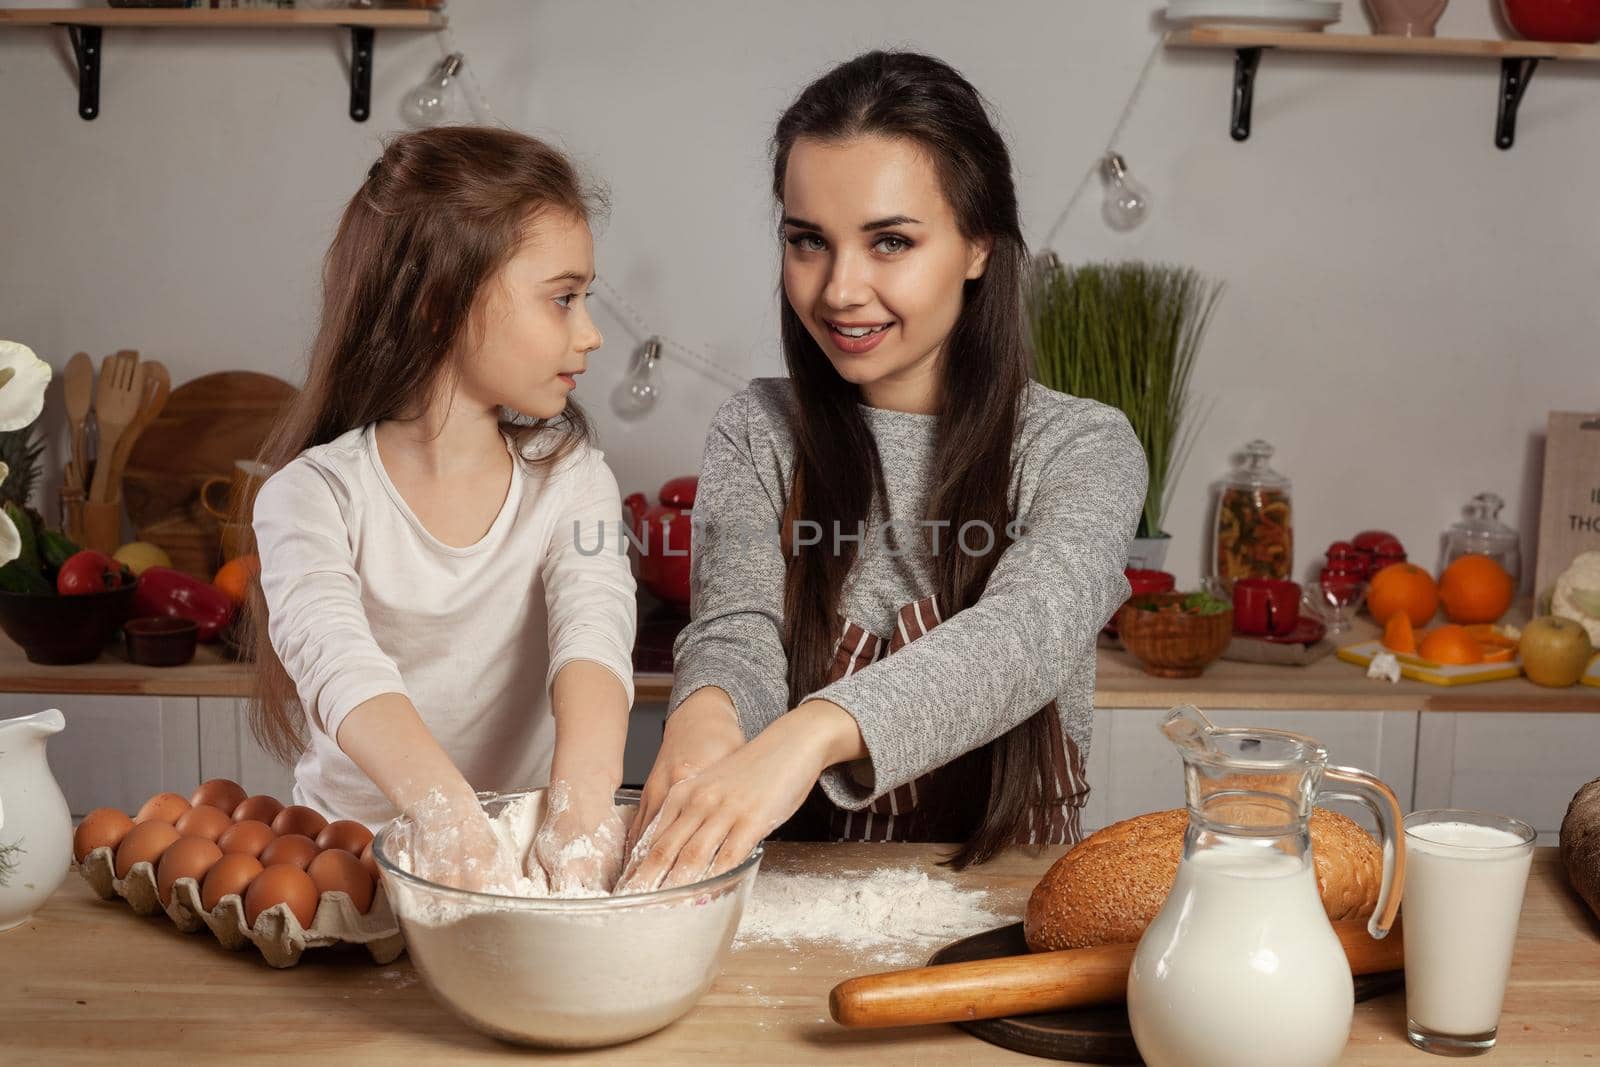 Happy loving family are preparing pastries together. Gorgeous mommy and her little girl are touching a flour and having fun at the kitchen, against a white wall with shelves and bulbs on it. Homemade food and little helper.